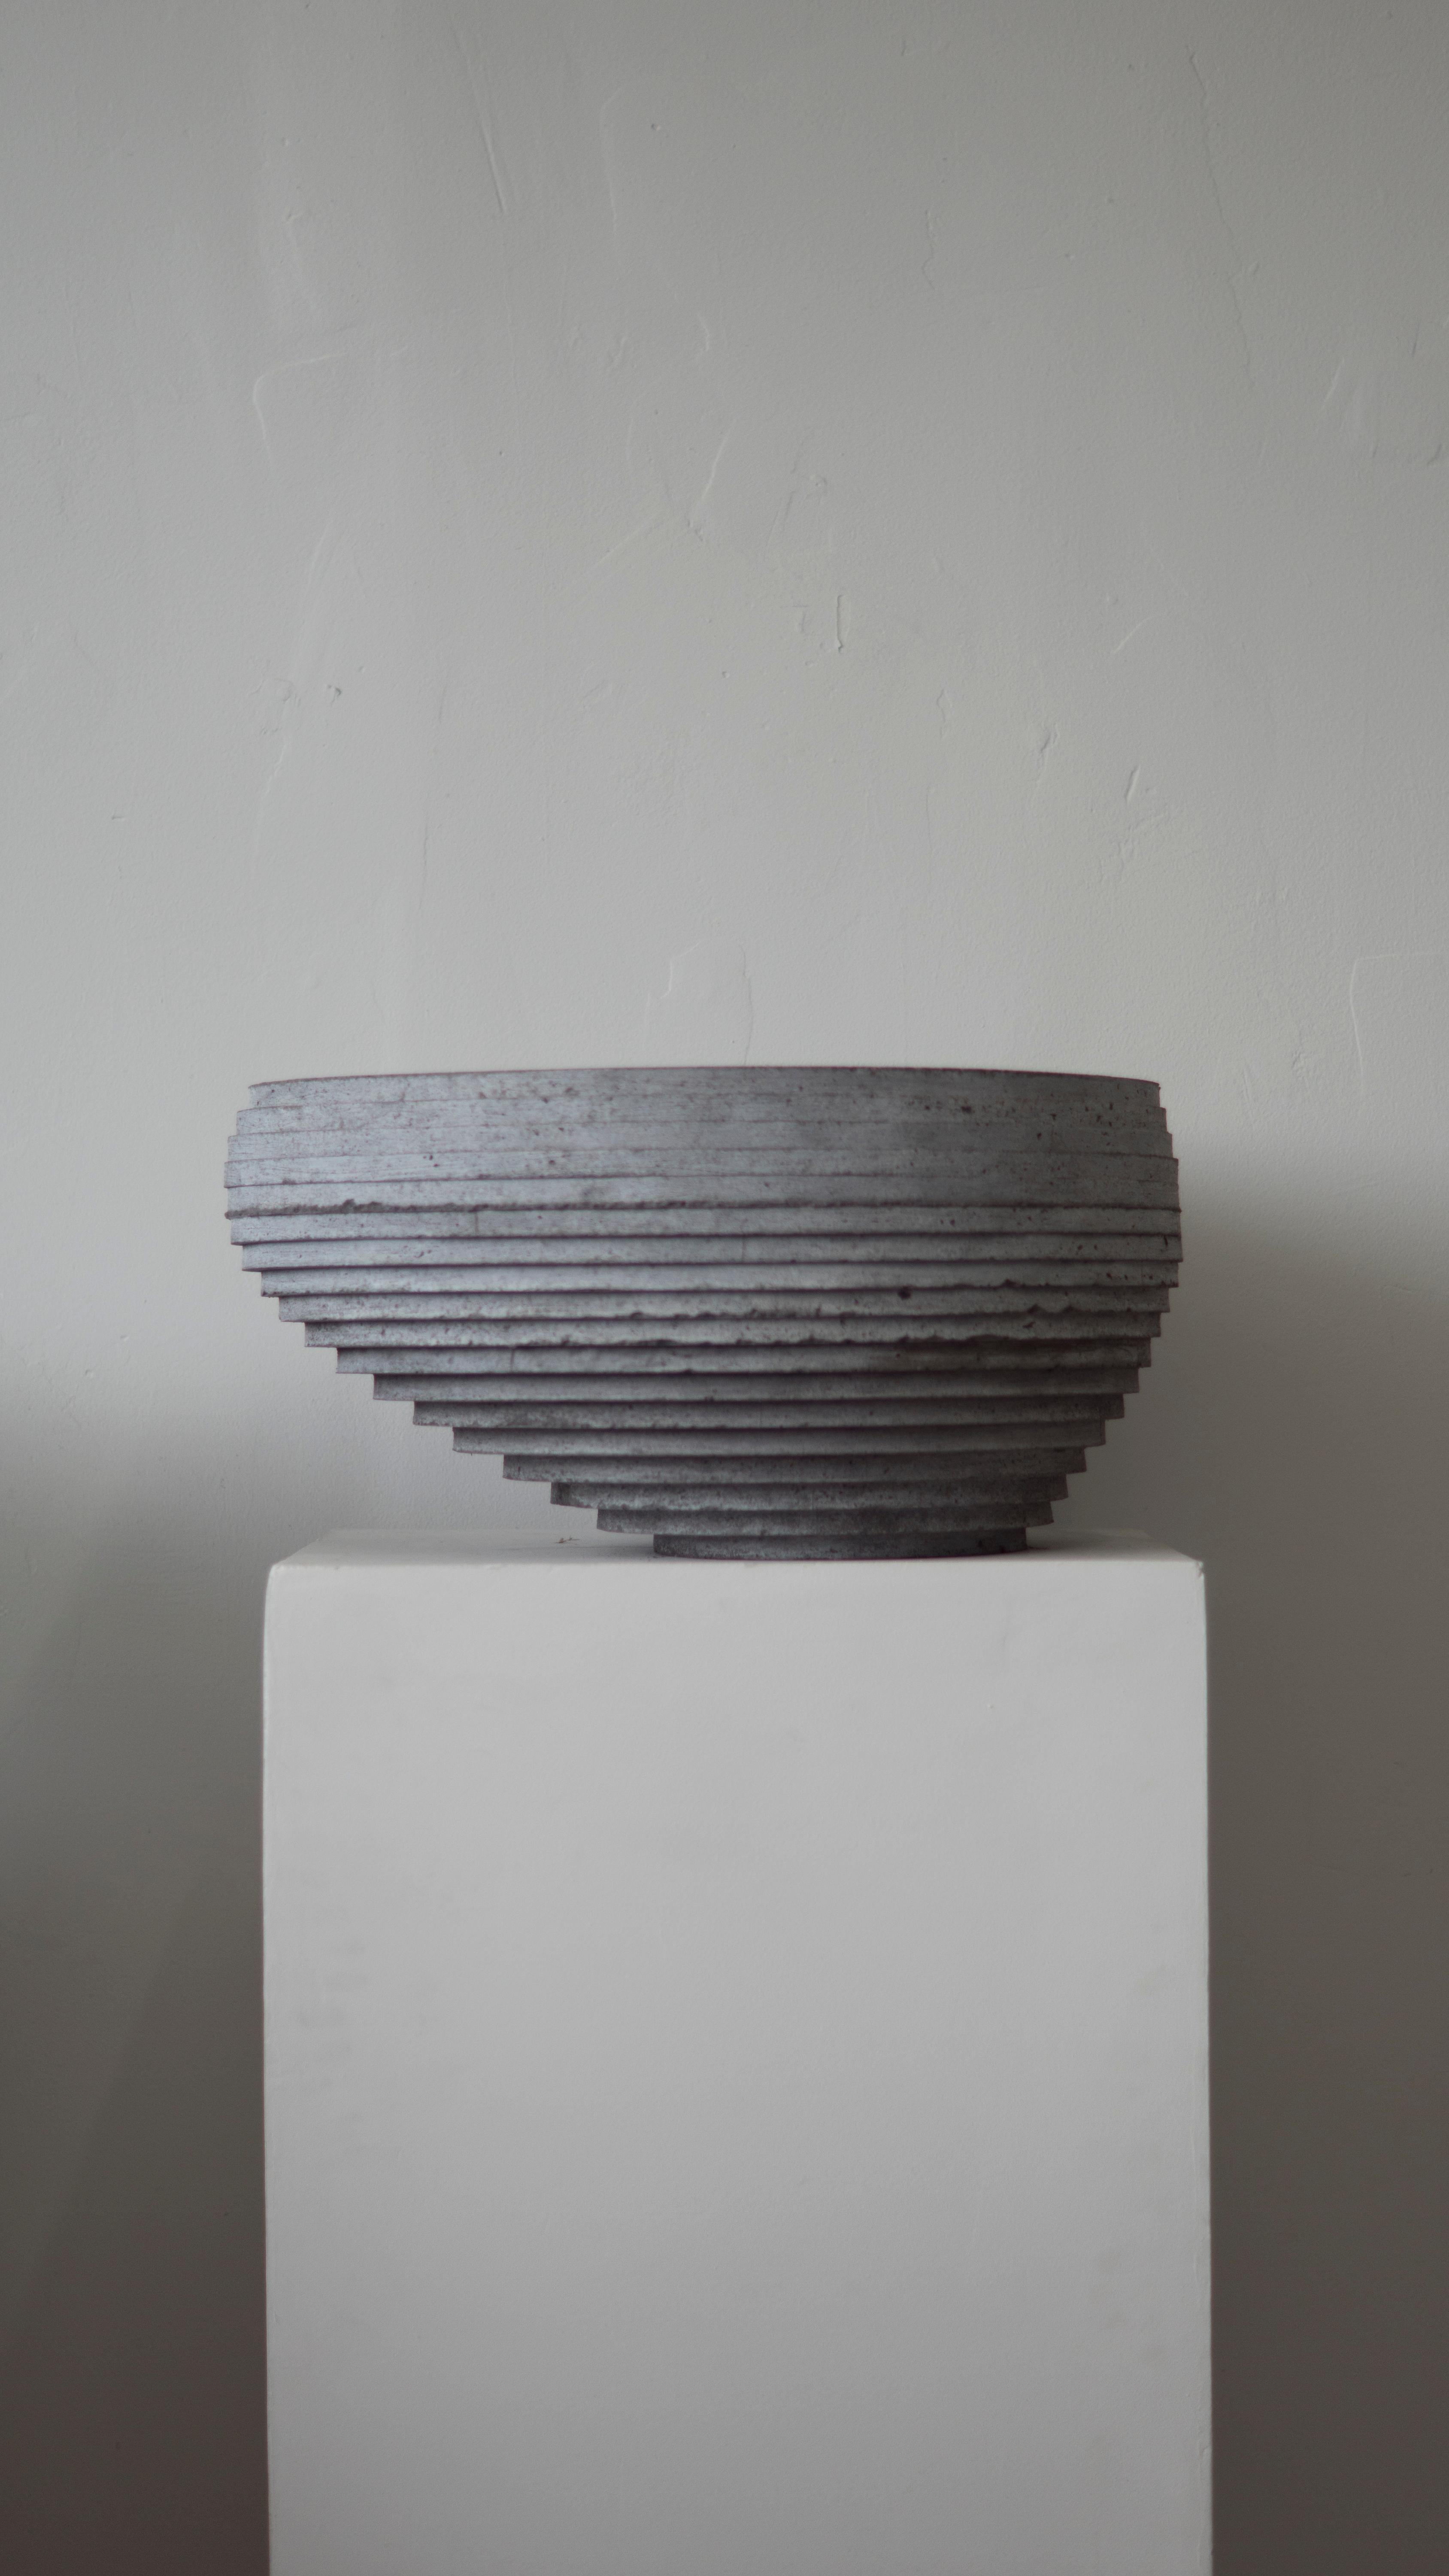 Hand-cast bowl for indoor and outdoor use. Can be used for planting as well; drainage holes can be added.

At the intersection of art, craft, and design, Concrete Poetics' debut collection of hand-cast cement sculptural furniture and accessories